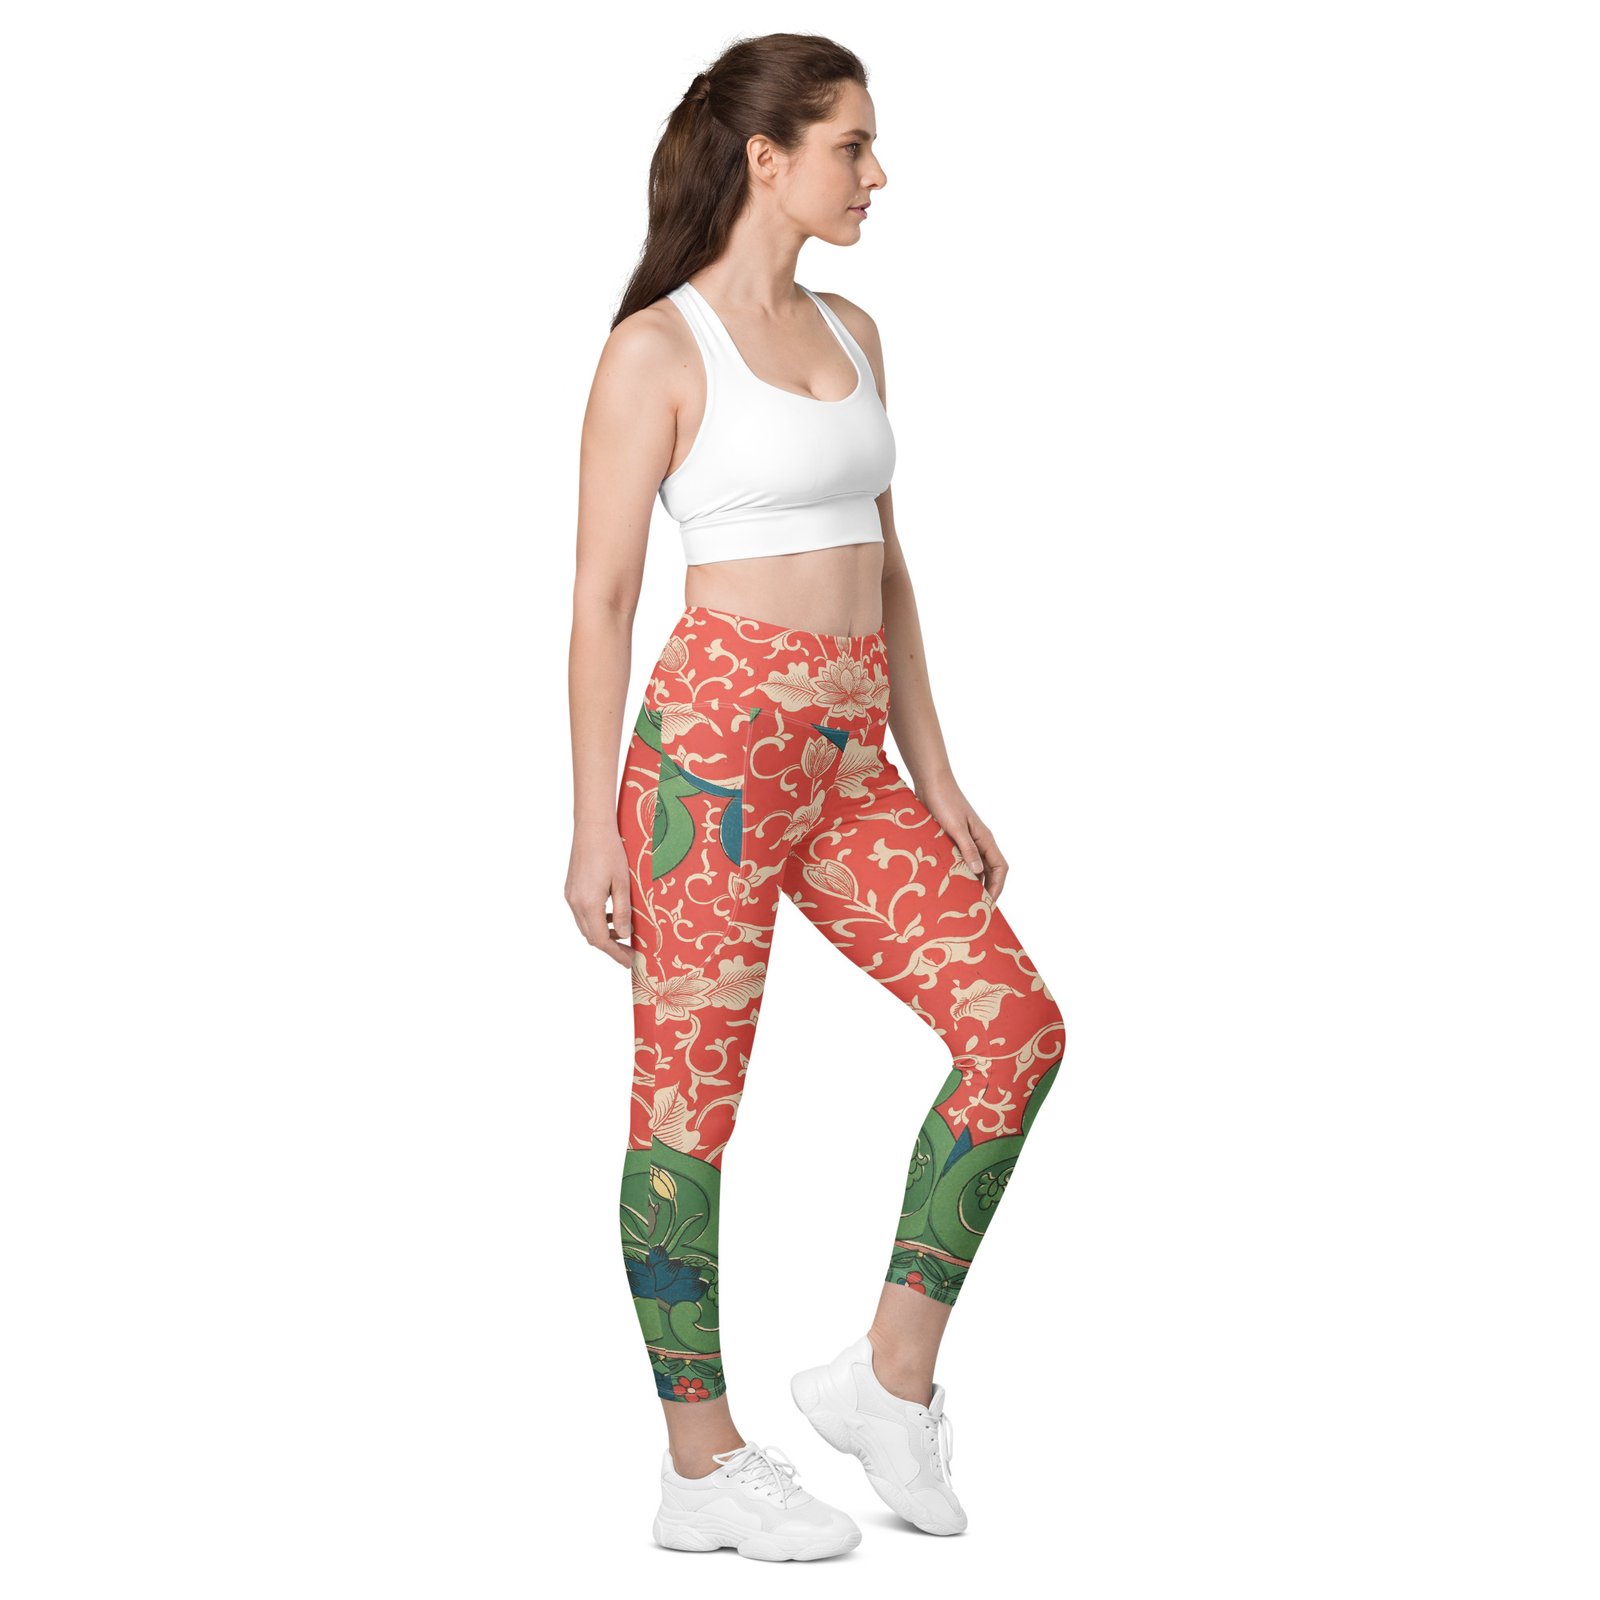 Oflare Artful Flare Leggings Where Art Meets Comfort and Style